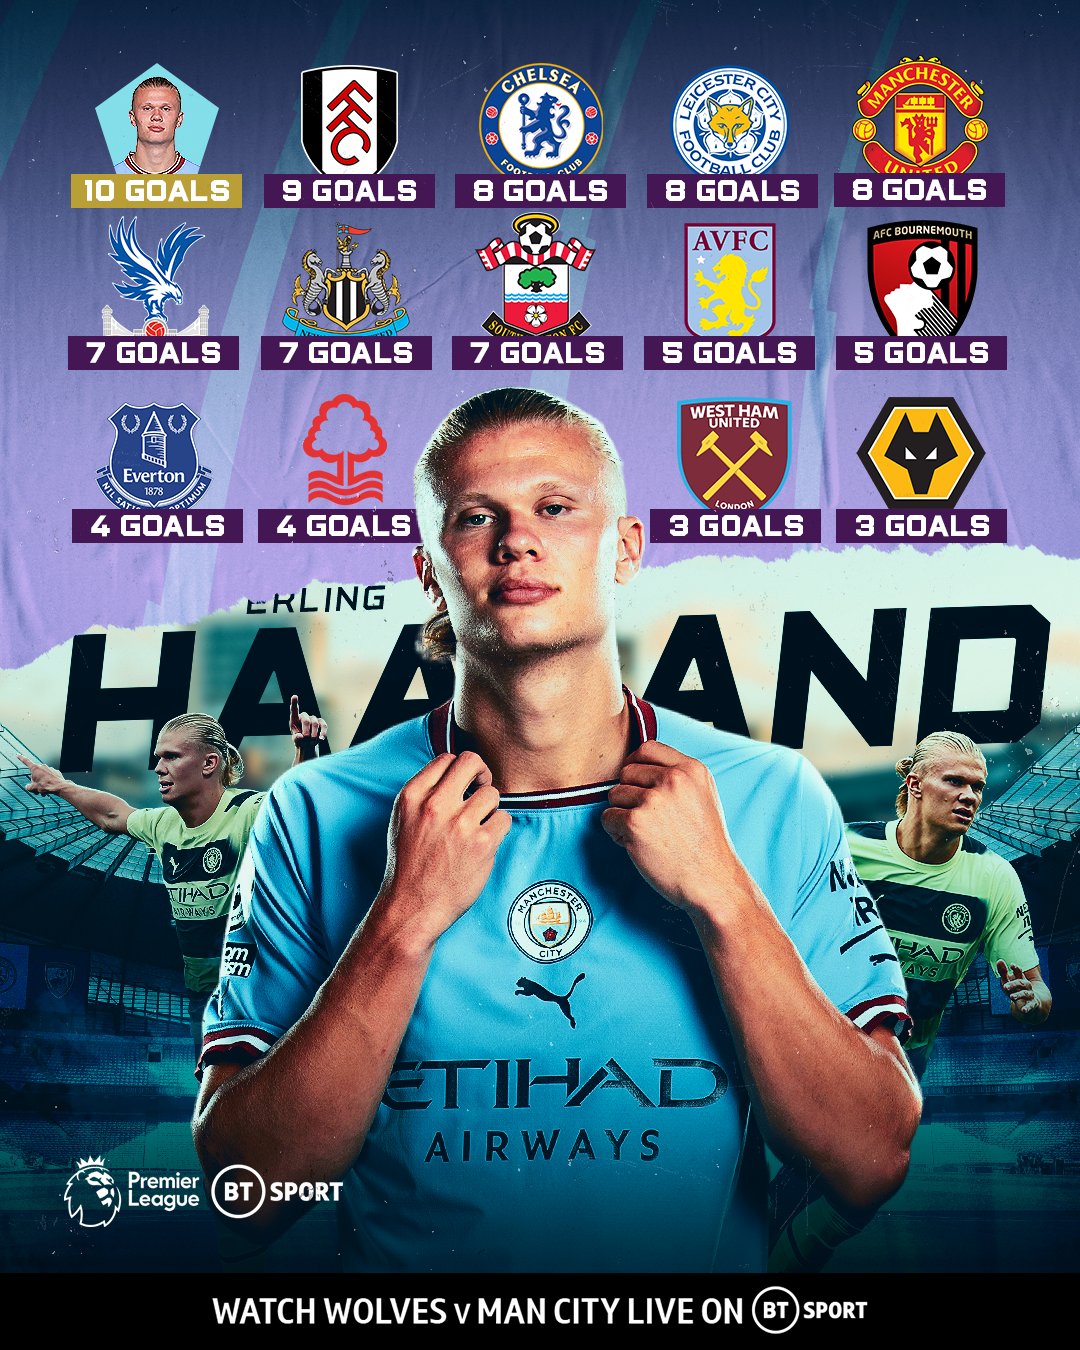 Football on BT Sport on Twitter: "Erling Haaland is a freak of nature... 🤖 The striker has scored more Premier League goals than 13 of the other 19 clubs in the competition